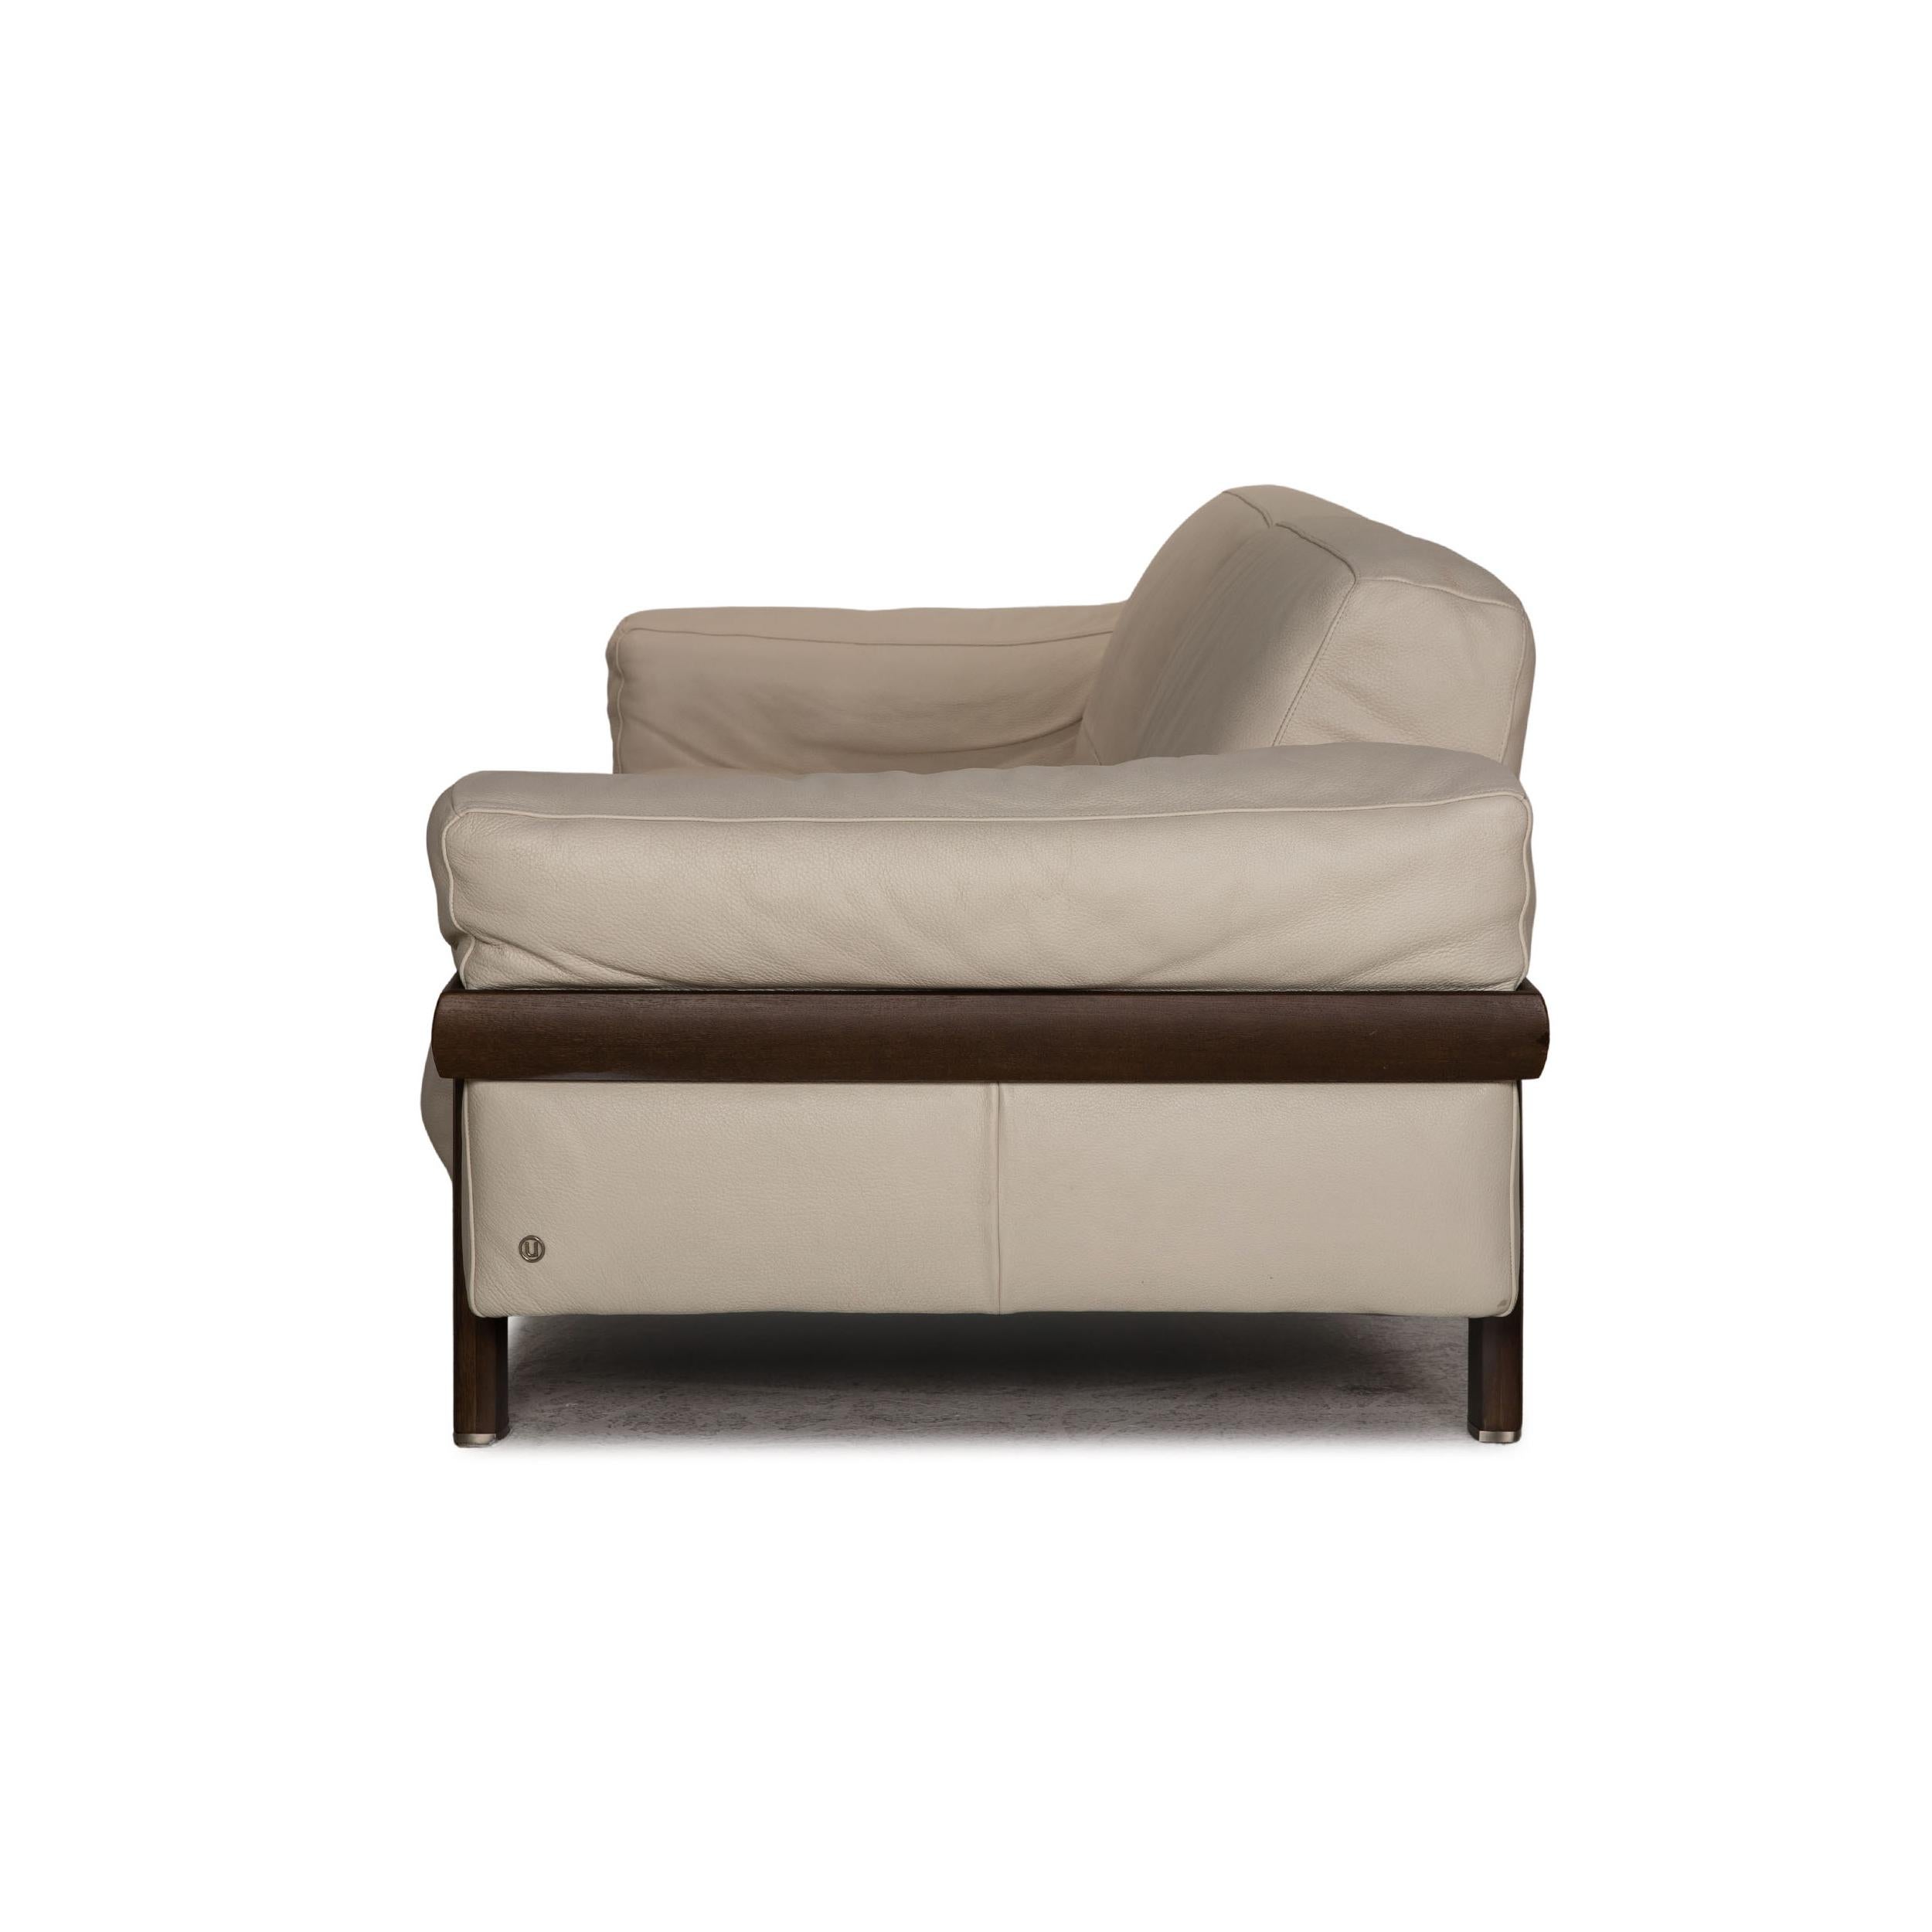 Natuzzi Leather Sofa Set Cream 2x Two-Seater Couch For Sale at 1stDibs |  two seater couches, cream sofa set, cream leather 2 seater sofa